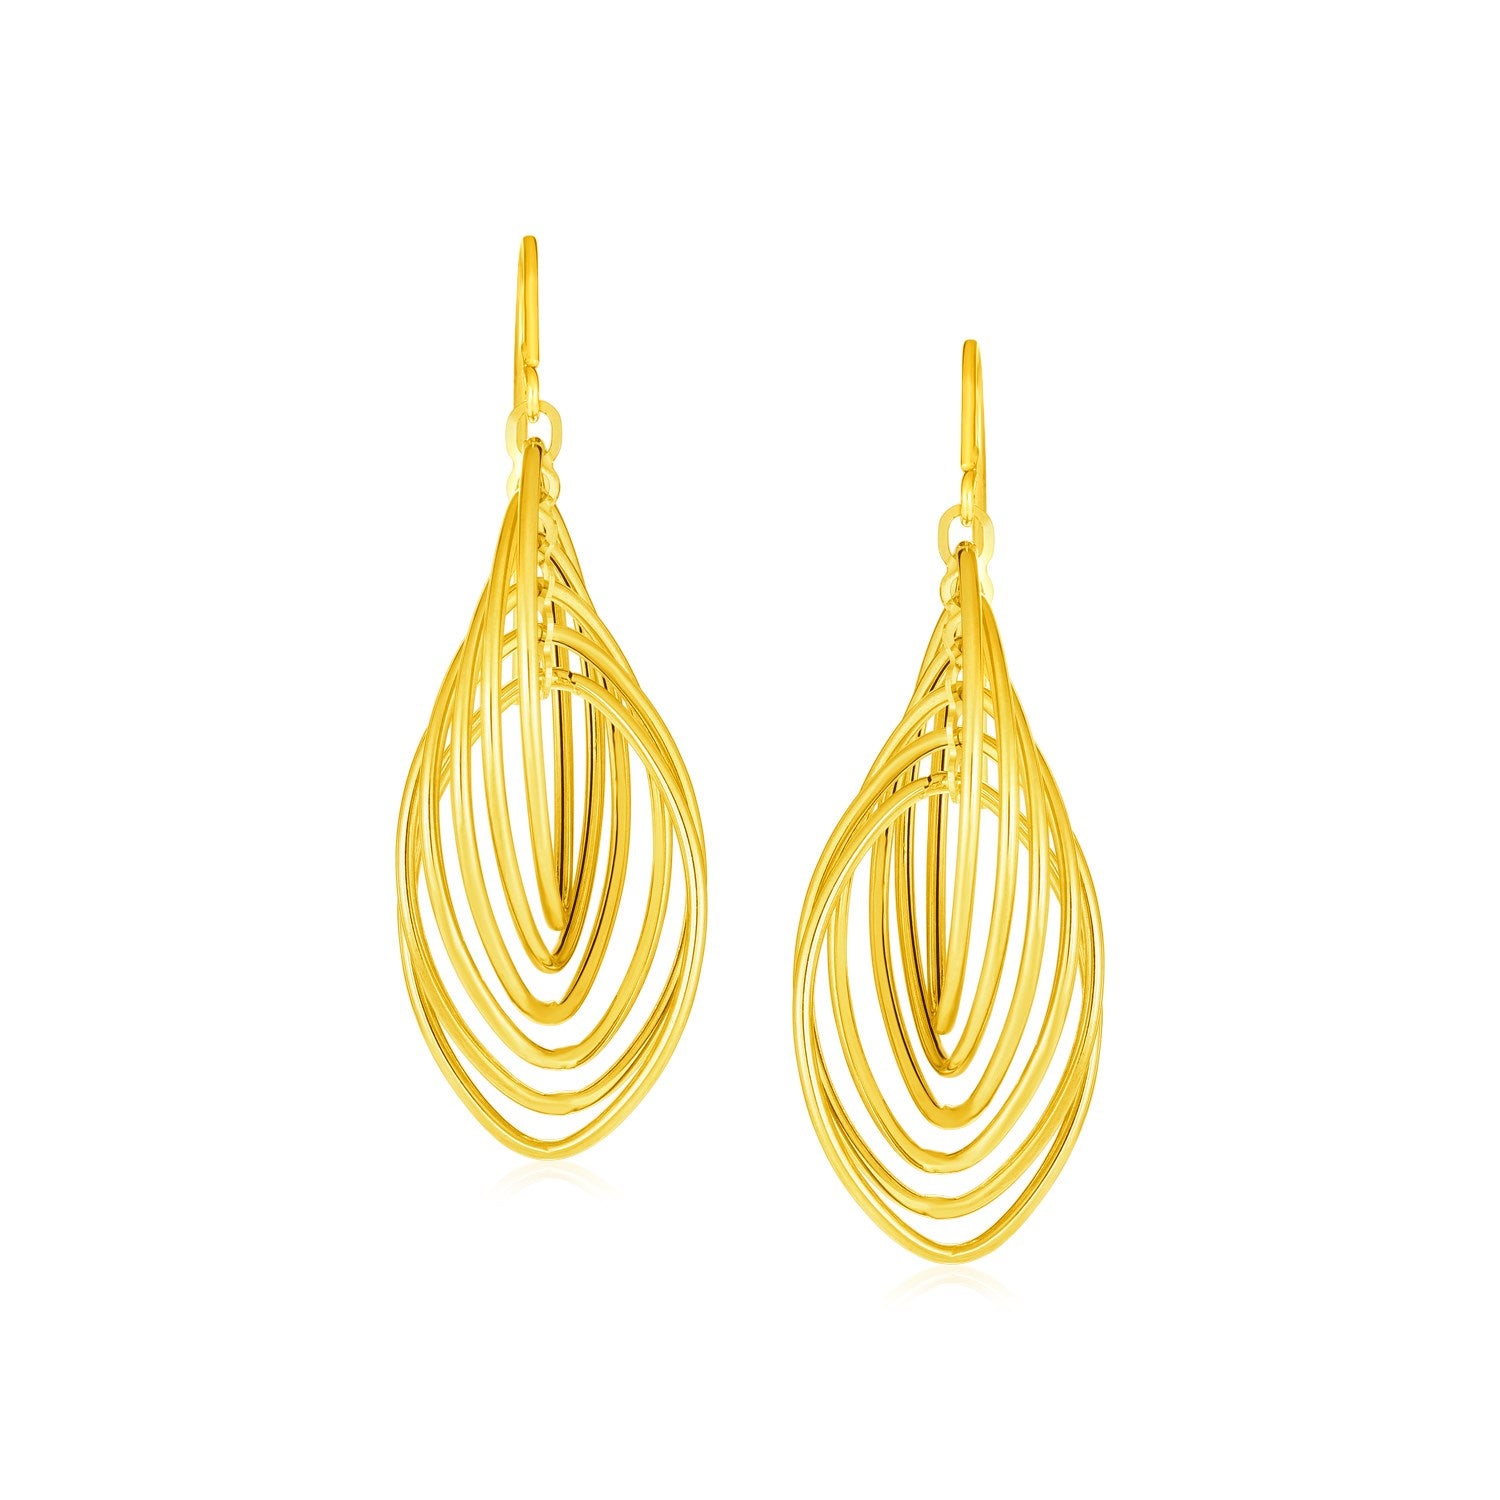 14k Yellow Gold Post Earrings with Polished Wire Dangles